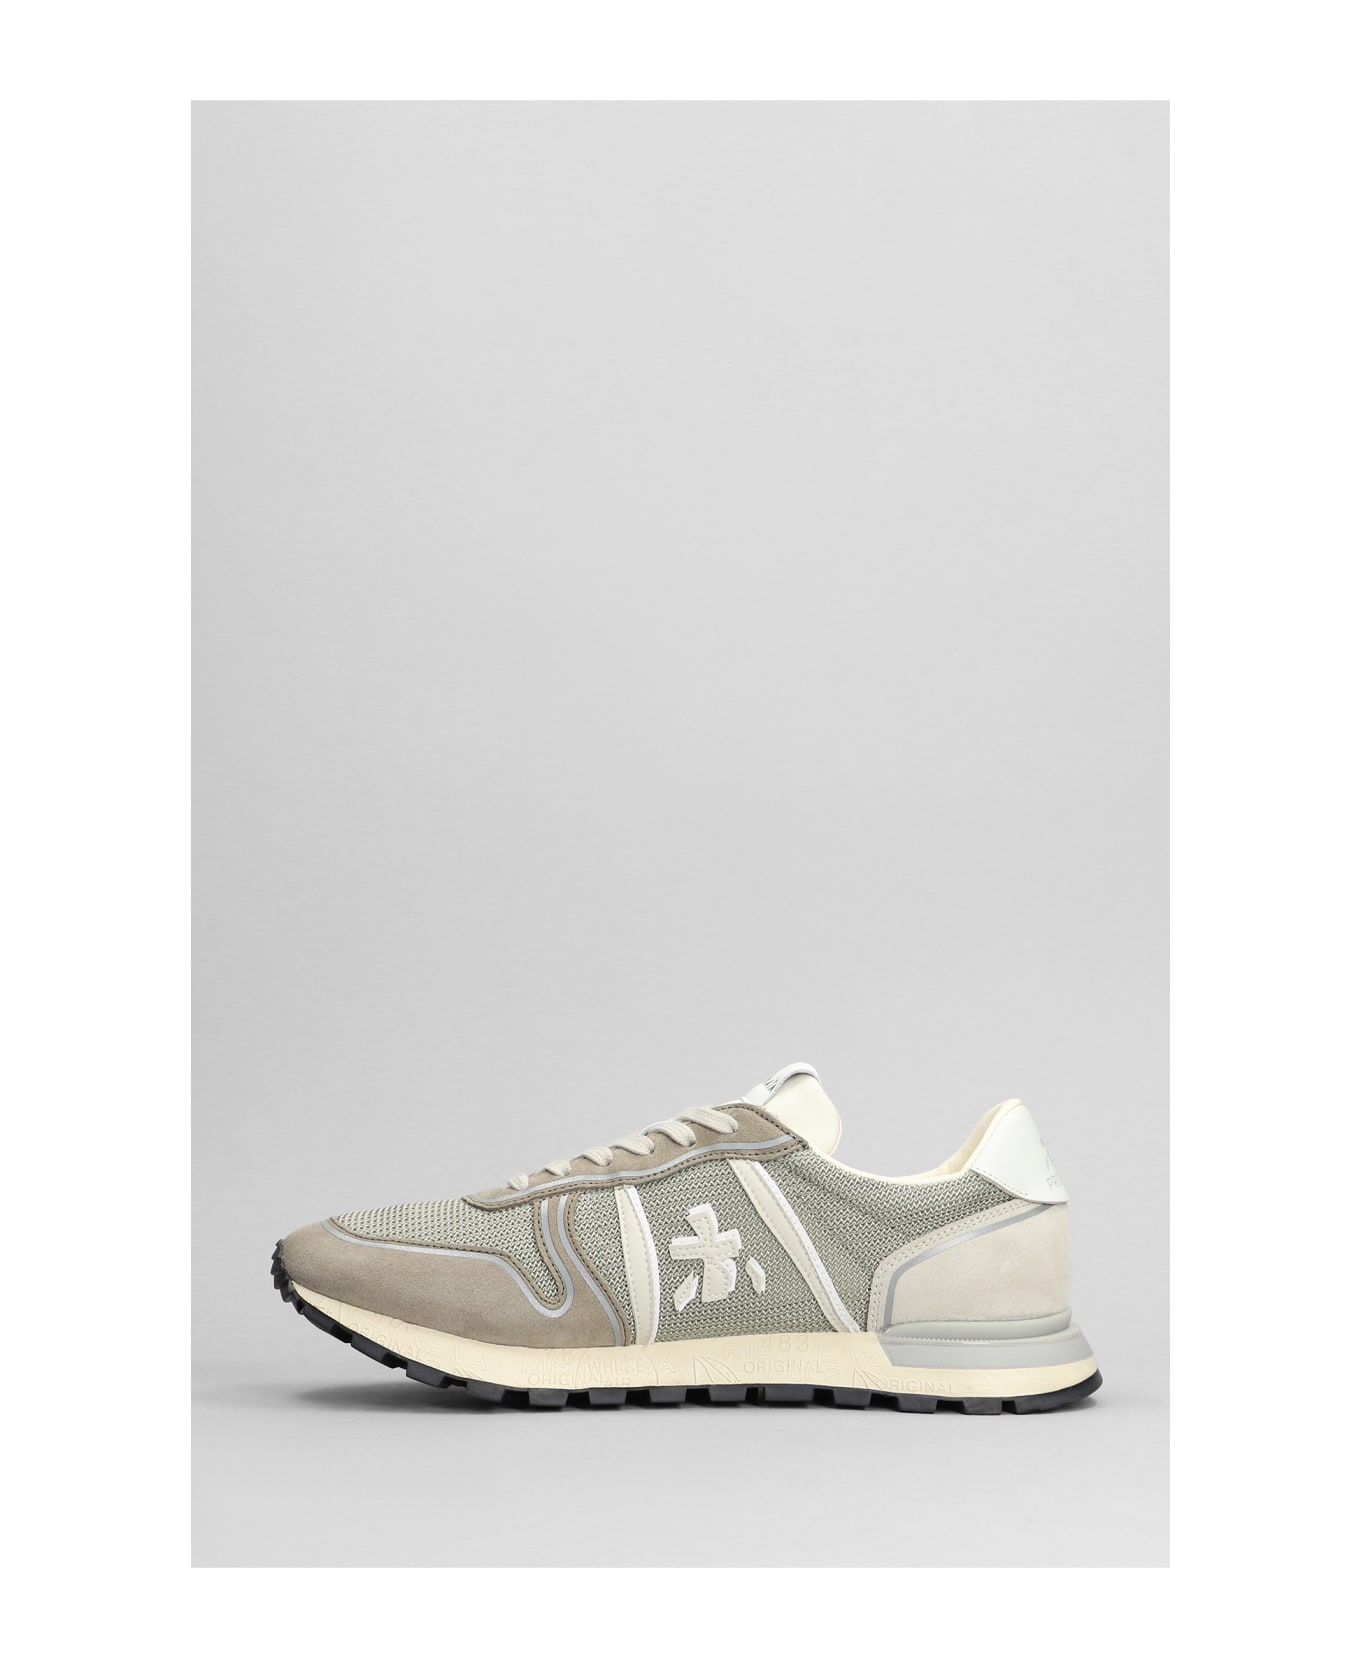 Premiata Ryan Sneakers In Taupe Suede And Fabric - Beige